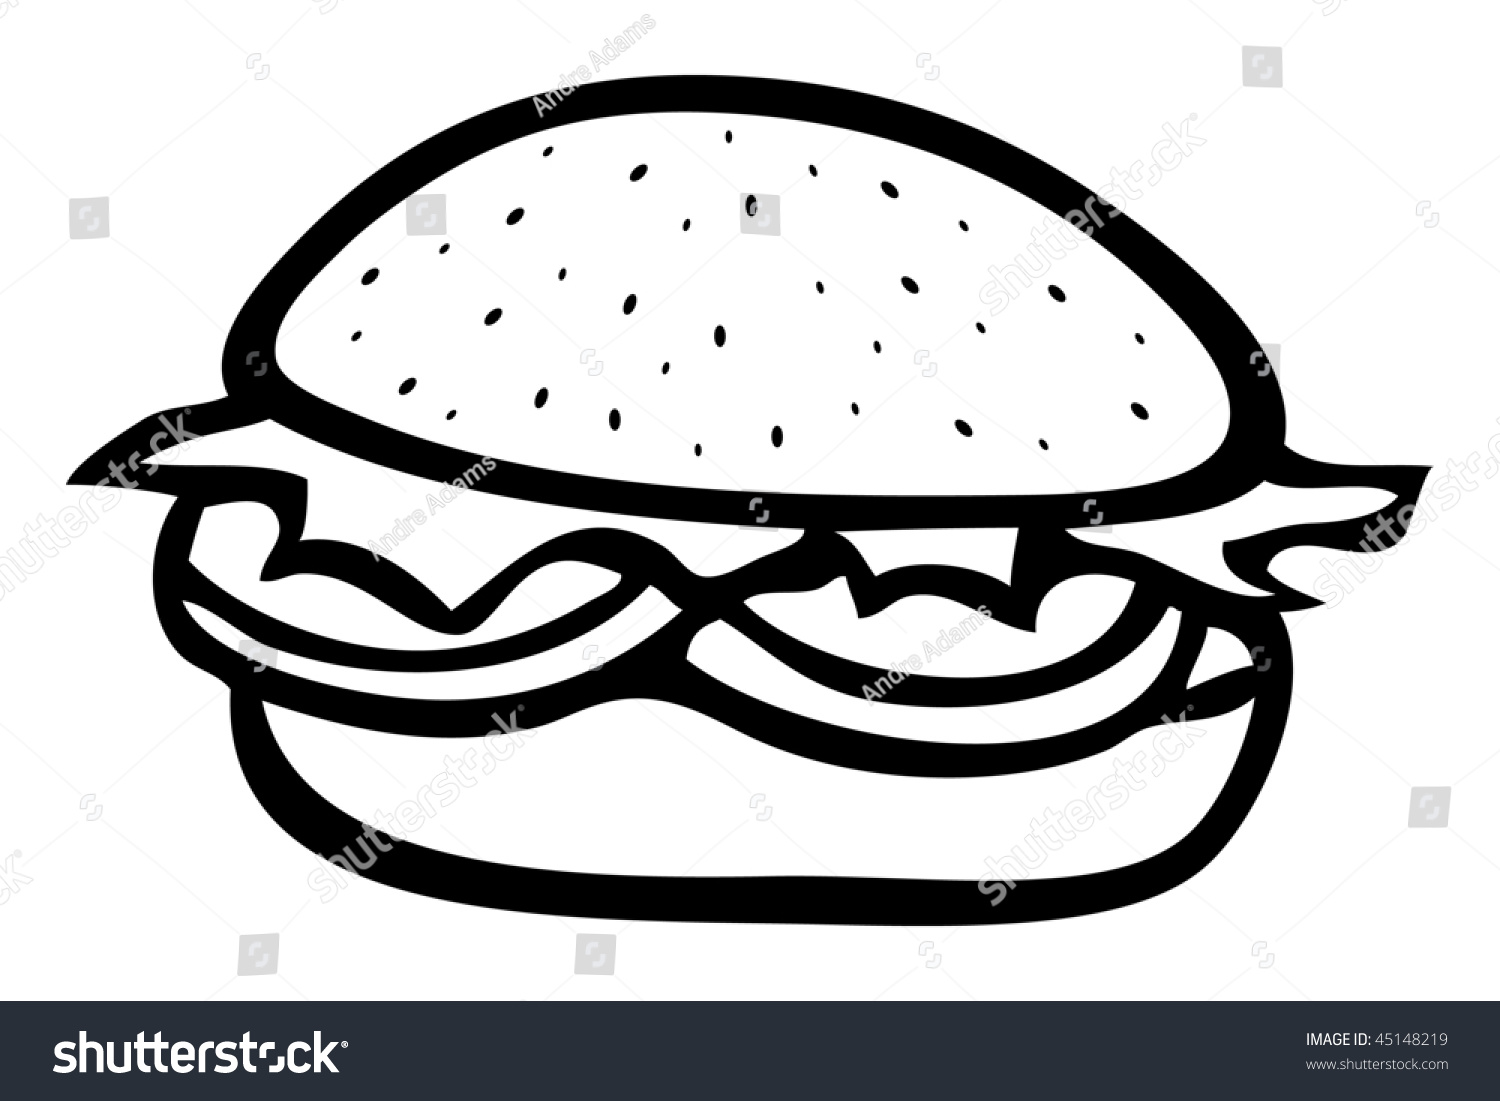 How to write a hamburger essay   thoughtco